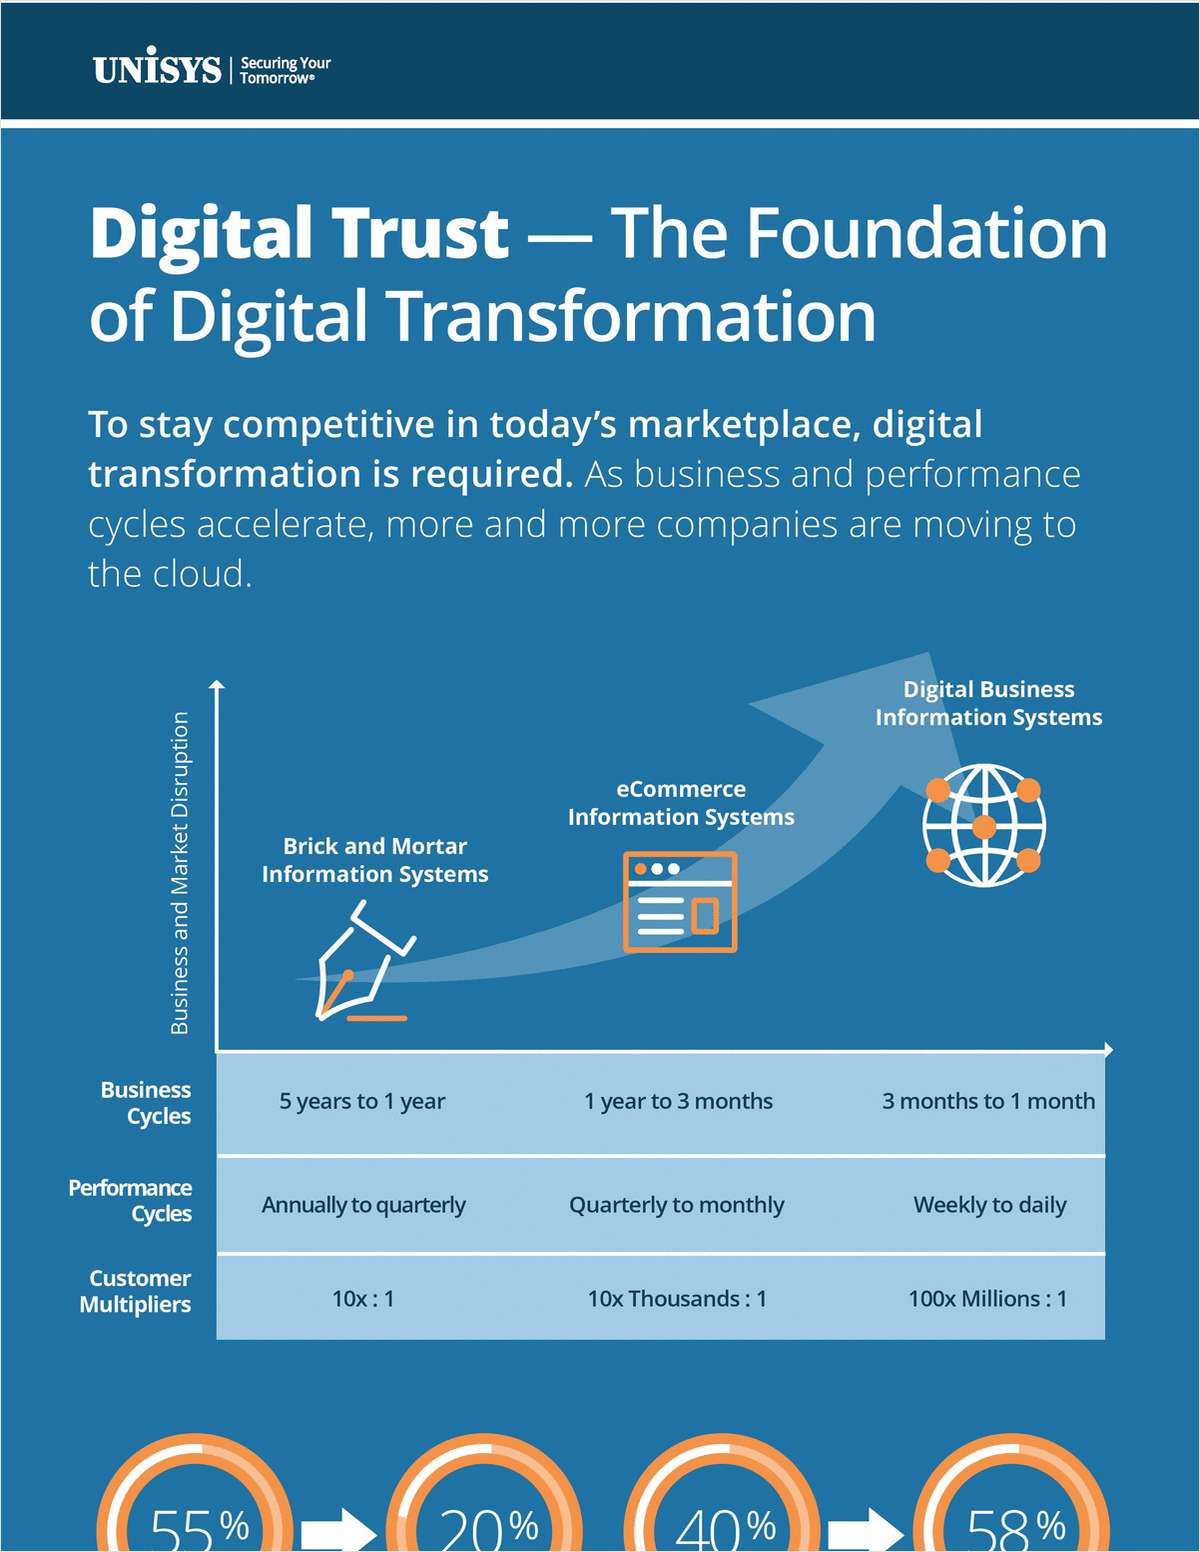 Why Digital Trust Should be a Critical Component of Your Company's Cybersecurity Model